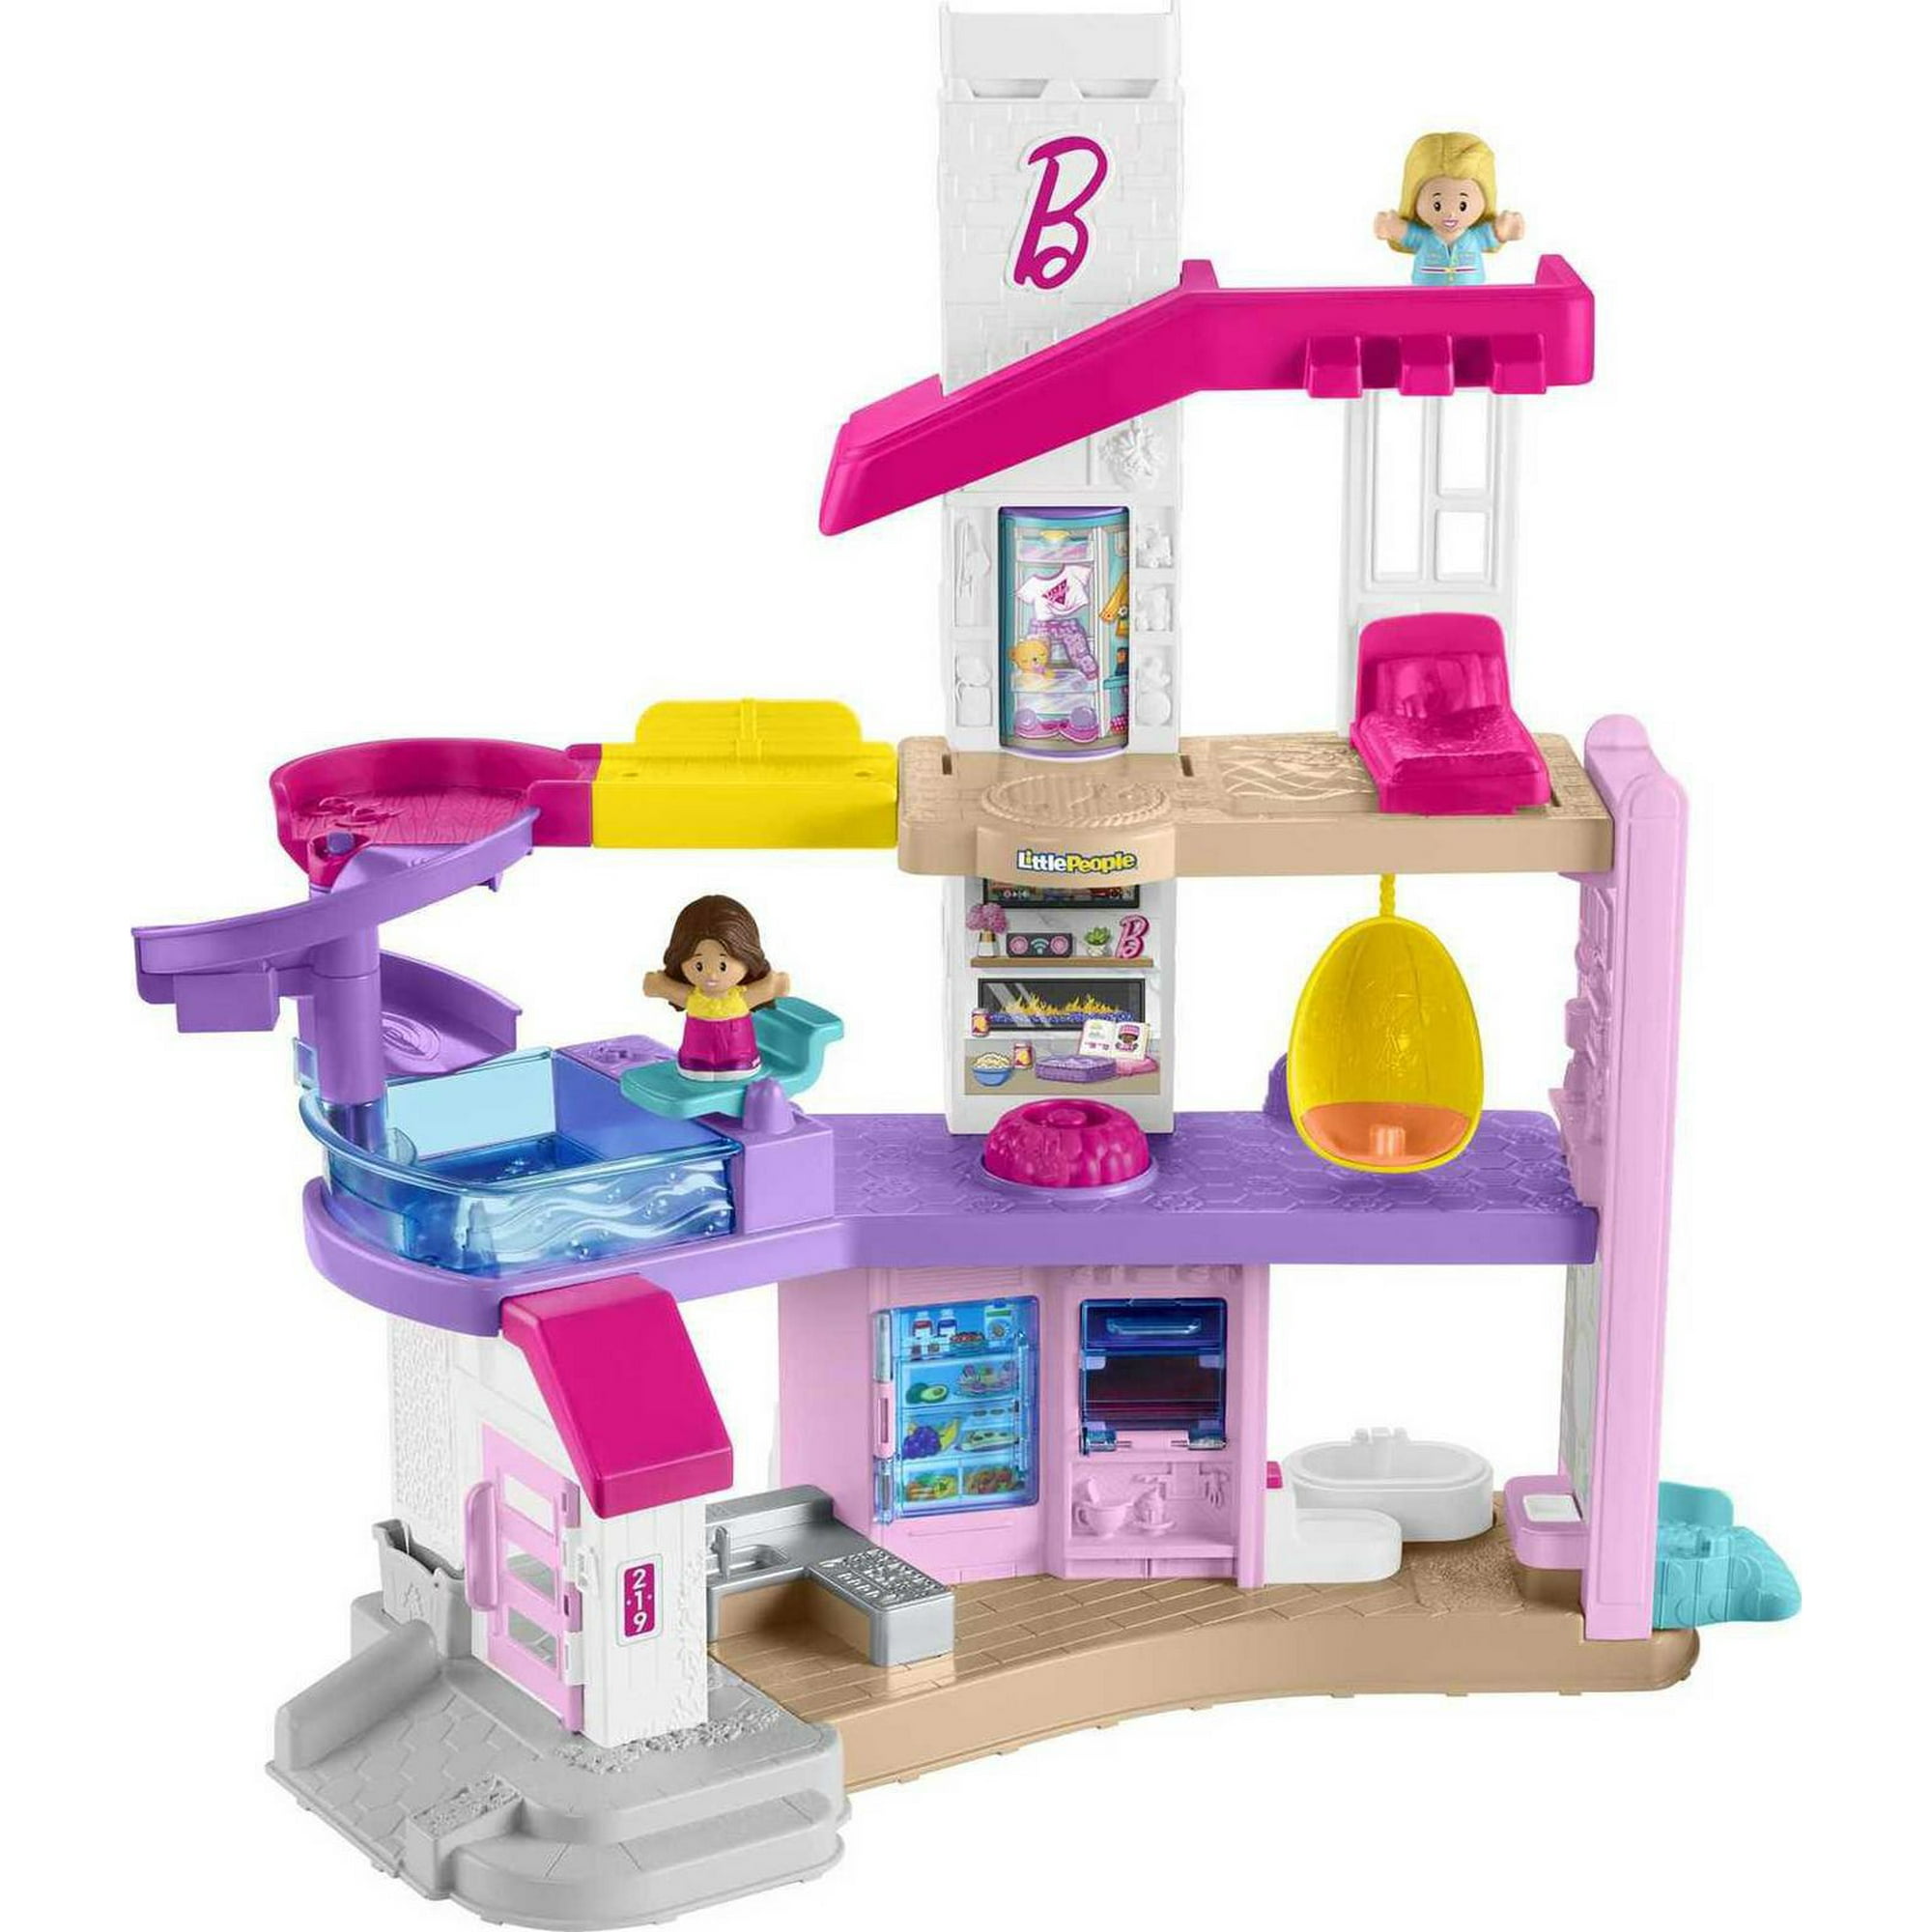 Walmart Clearance: Barbie Dreamhouse Possibly ONLY $30 (Regularly